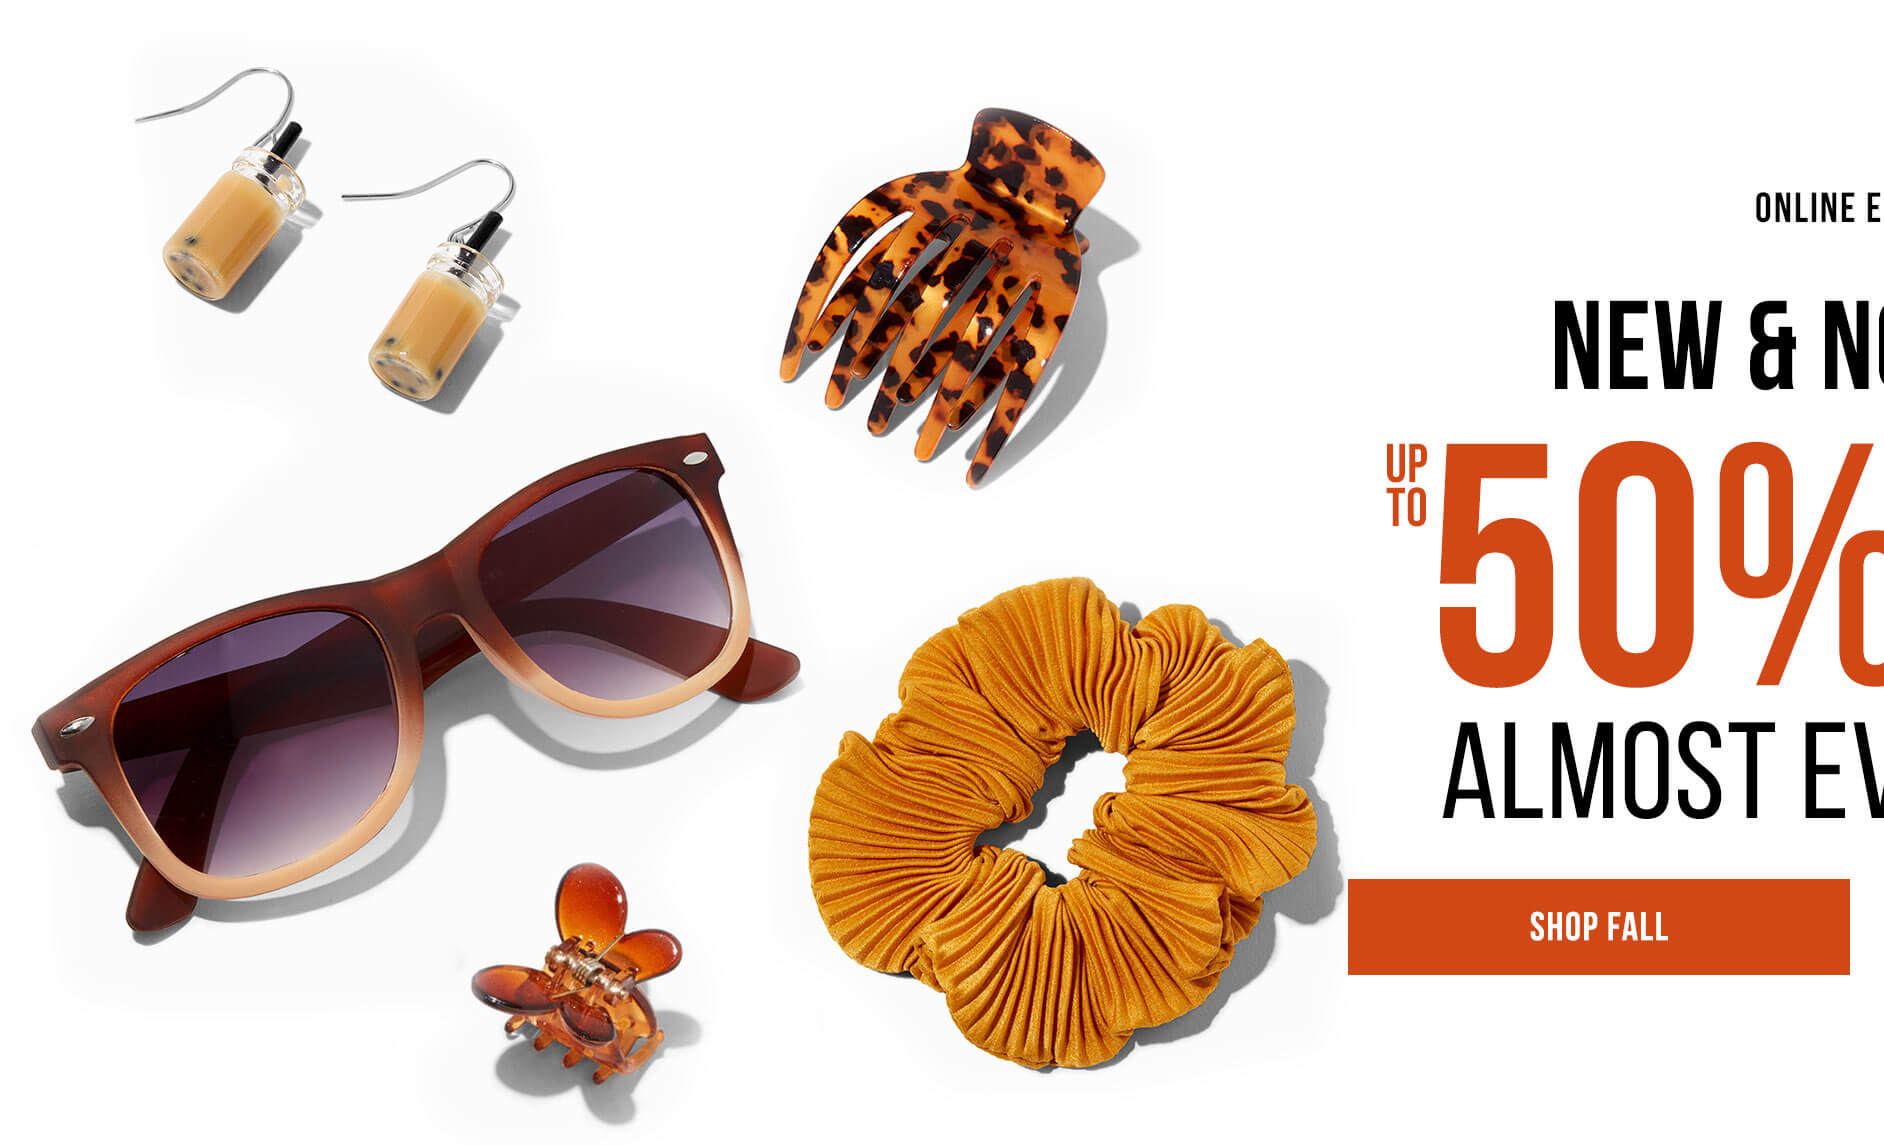 Online Exclusive New & Now: Fall Up To 50% OFF* Almost Everything - Shop Fall